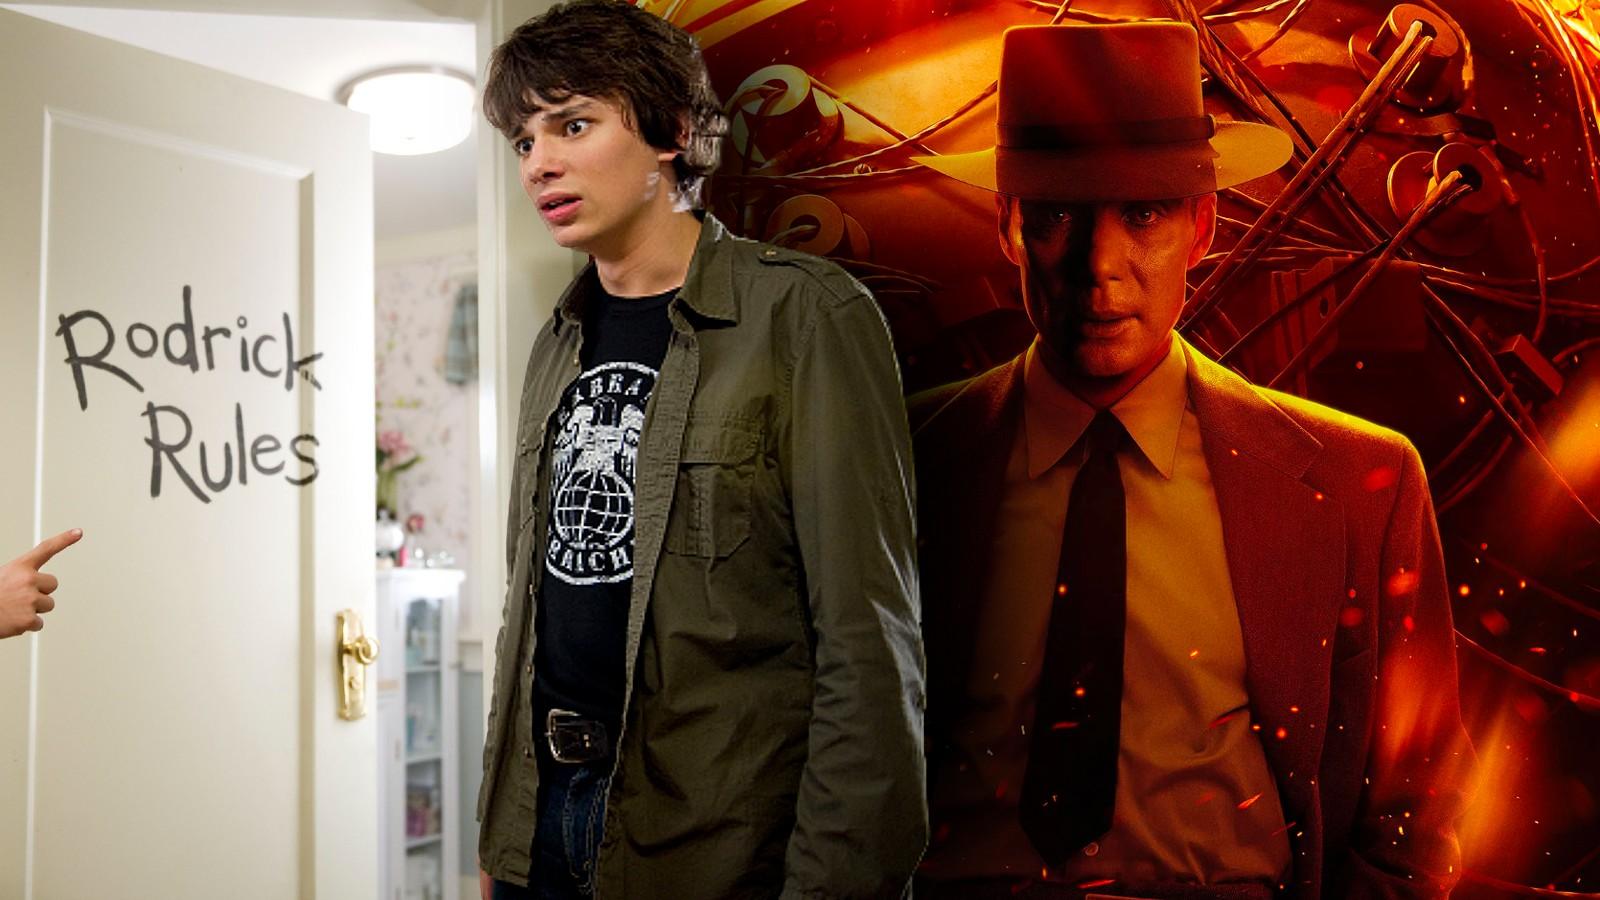 Devon Bostick in Diary of a Wimpy Kid: Rodrick Rules and the poster for Christopher Nolan's Oppenheimer